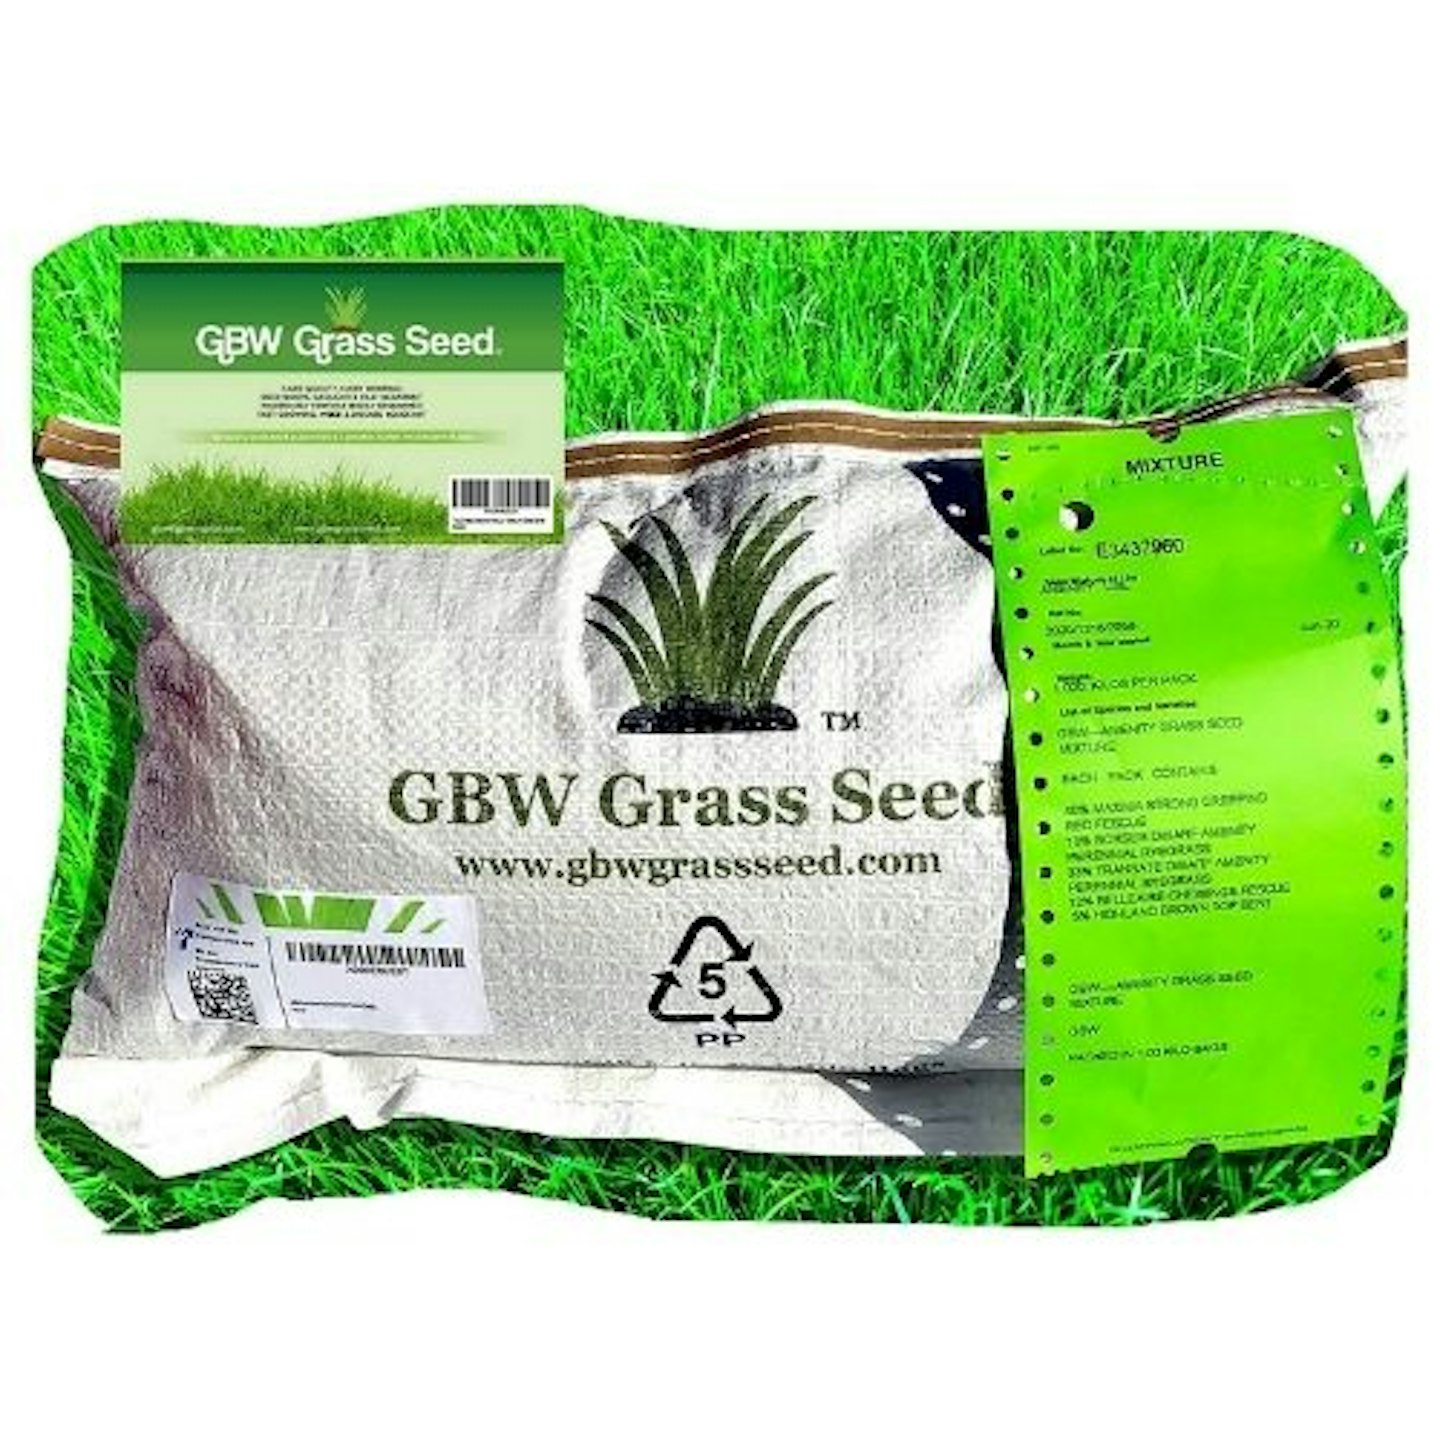 Fast & Easy to Grow Grass Seed